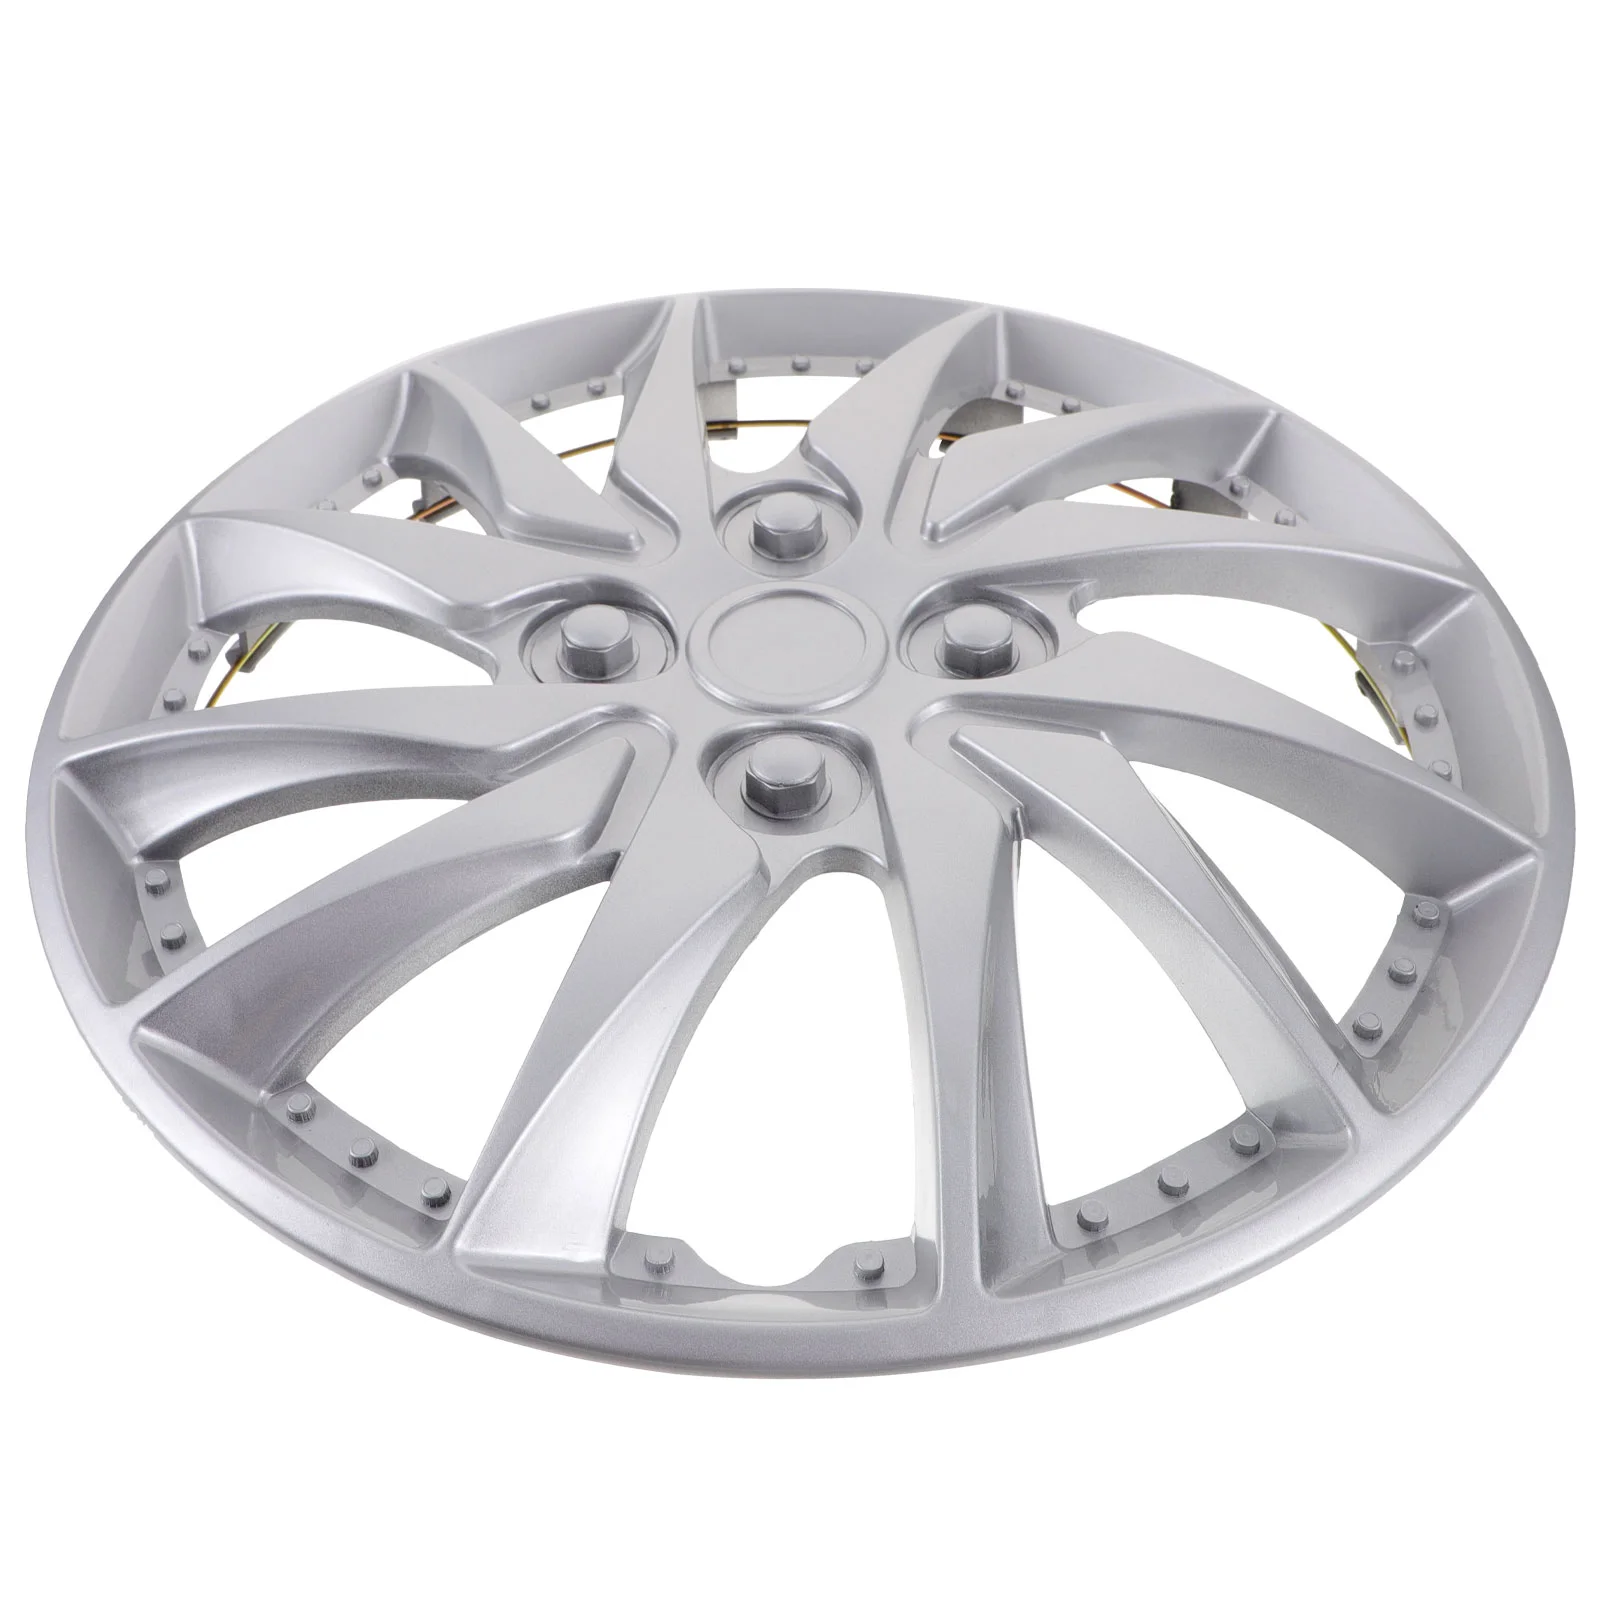 

Silver Universal Hubcap Wheel Covers Auto Tire Rim Covers Replacement Car Vehicle Wheel Rim Skin Cover 14 Inch